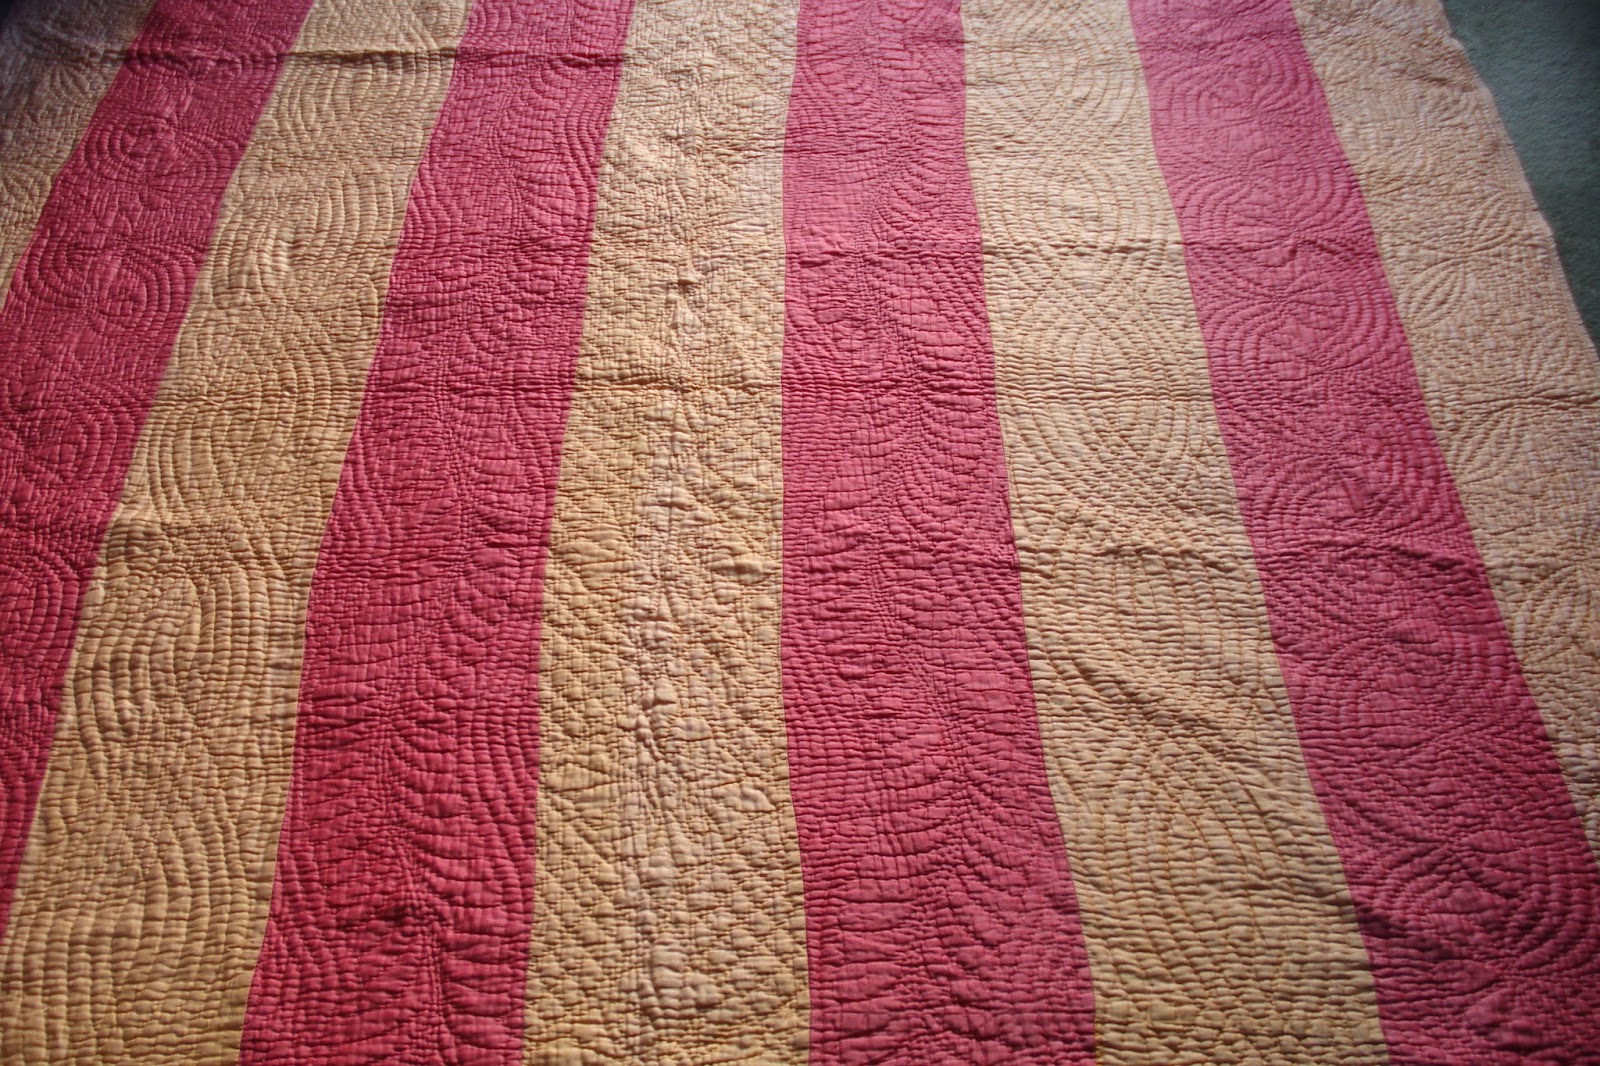 Welsh Quilts: Strippy Quilt from Ashington, Northumberland